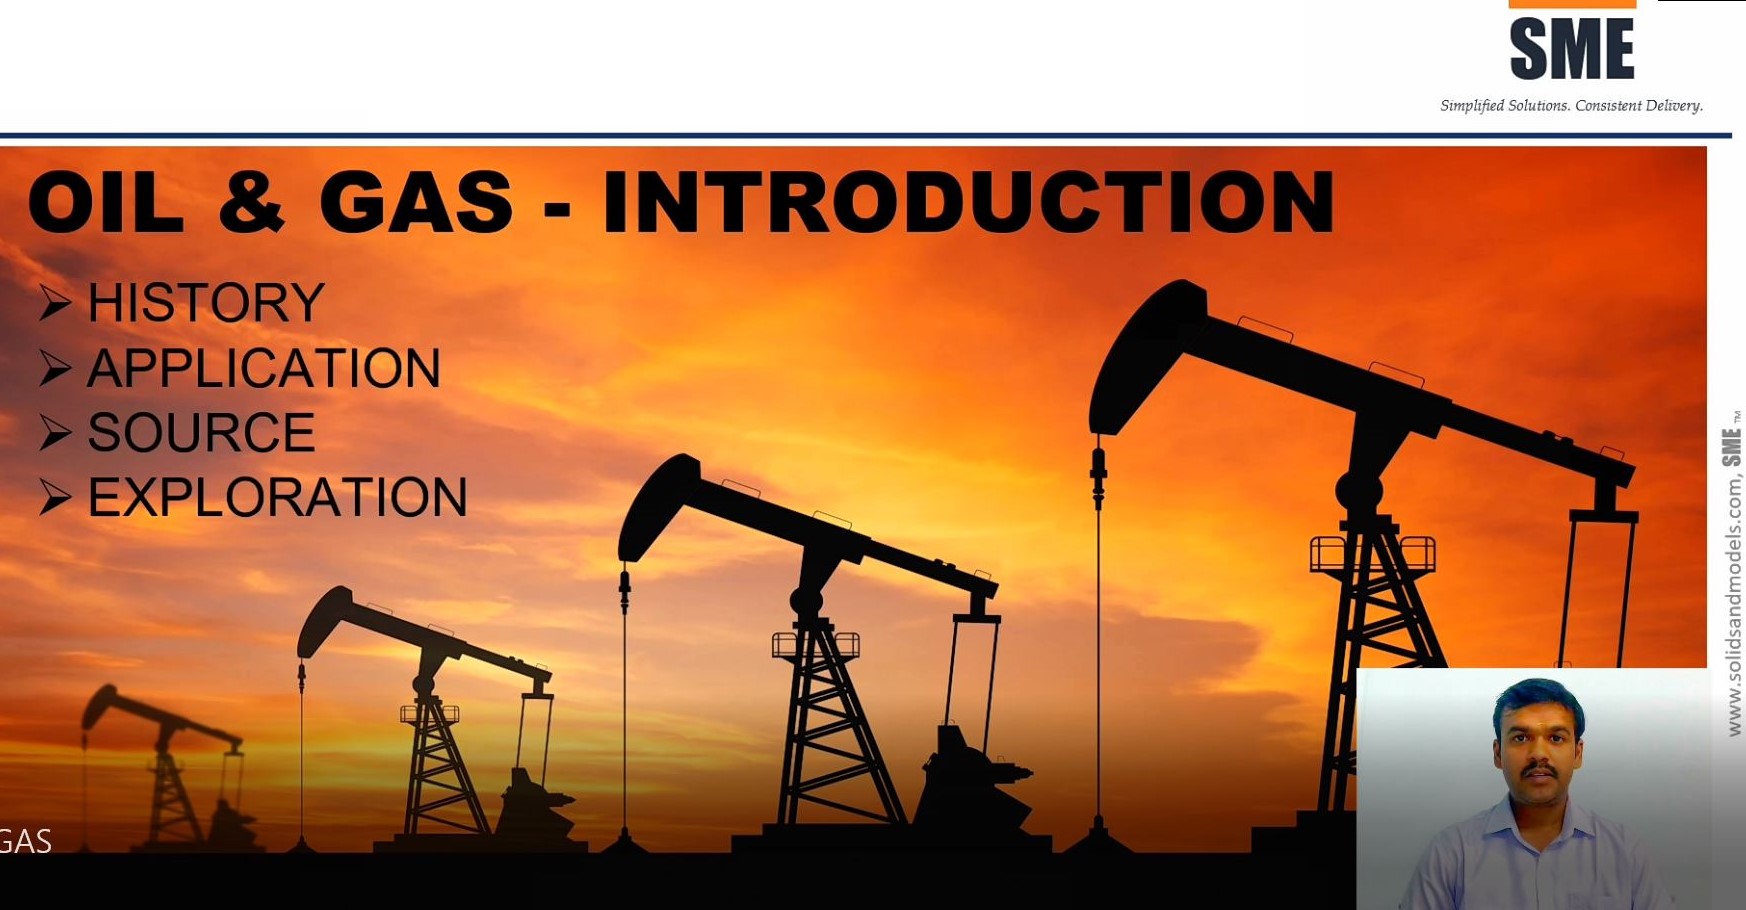 Video presentation on oil and gas introduction